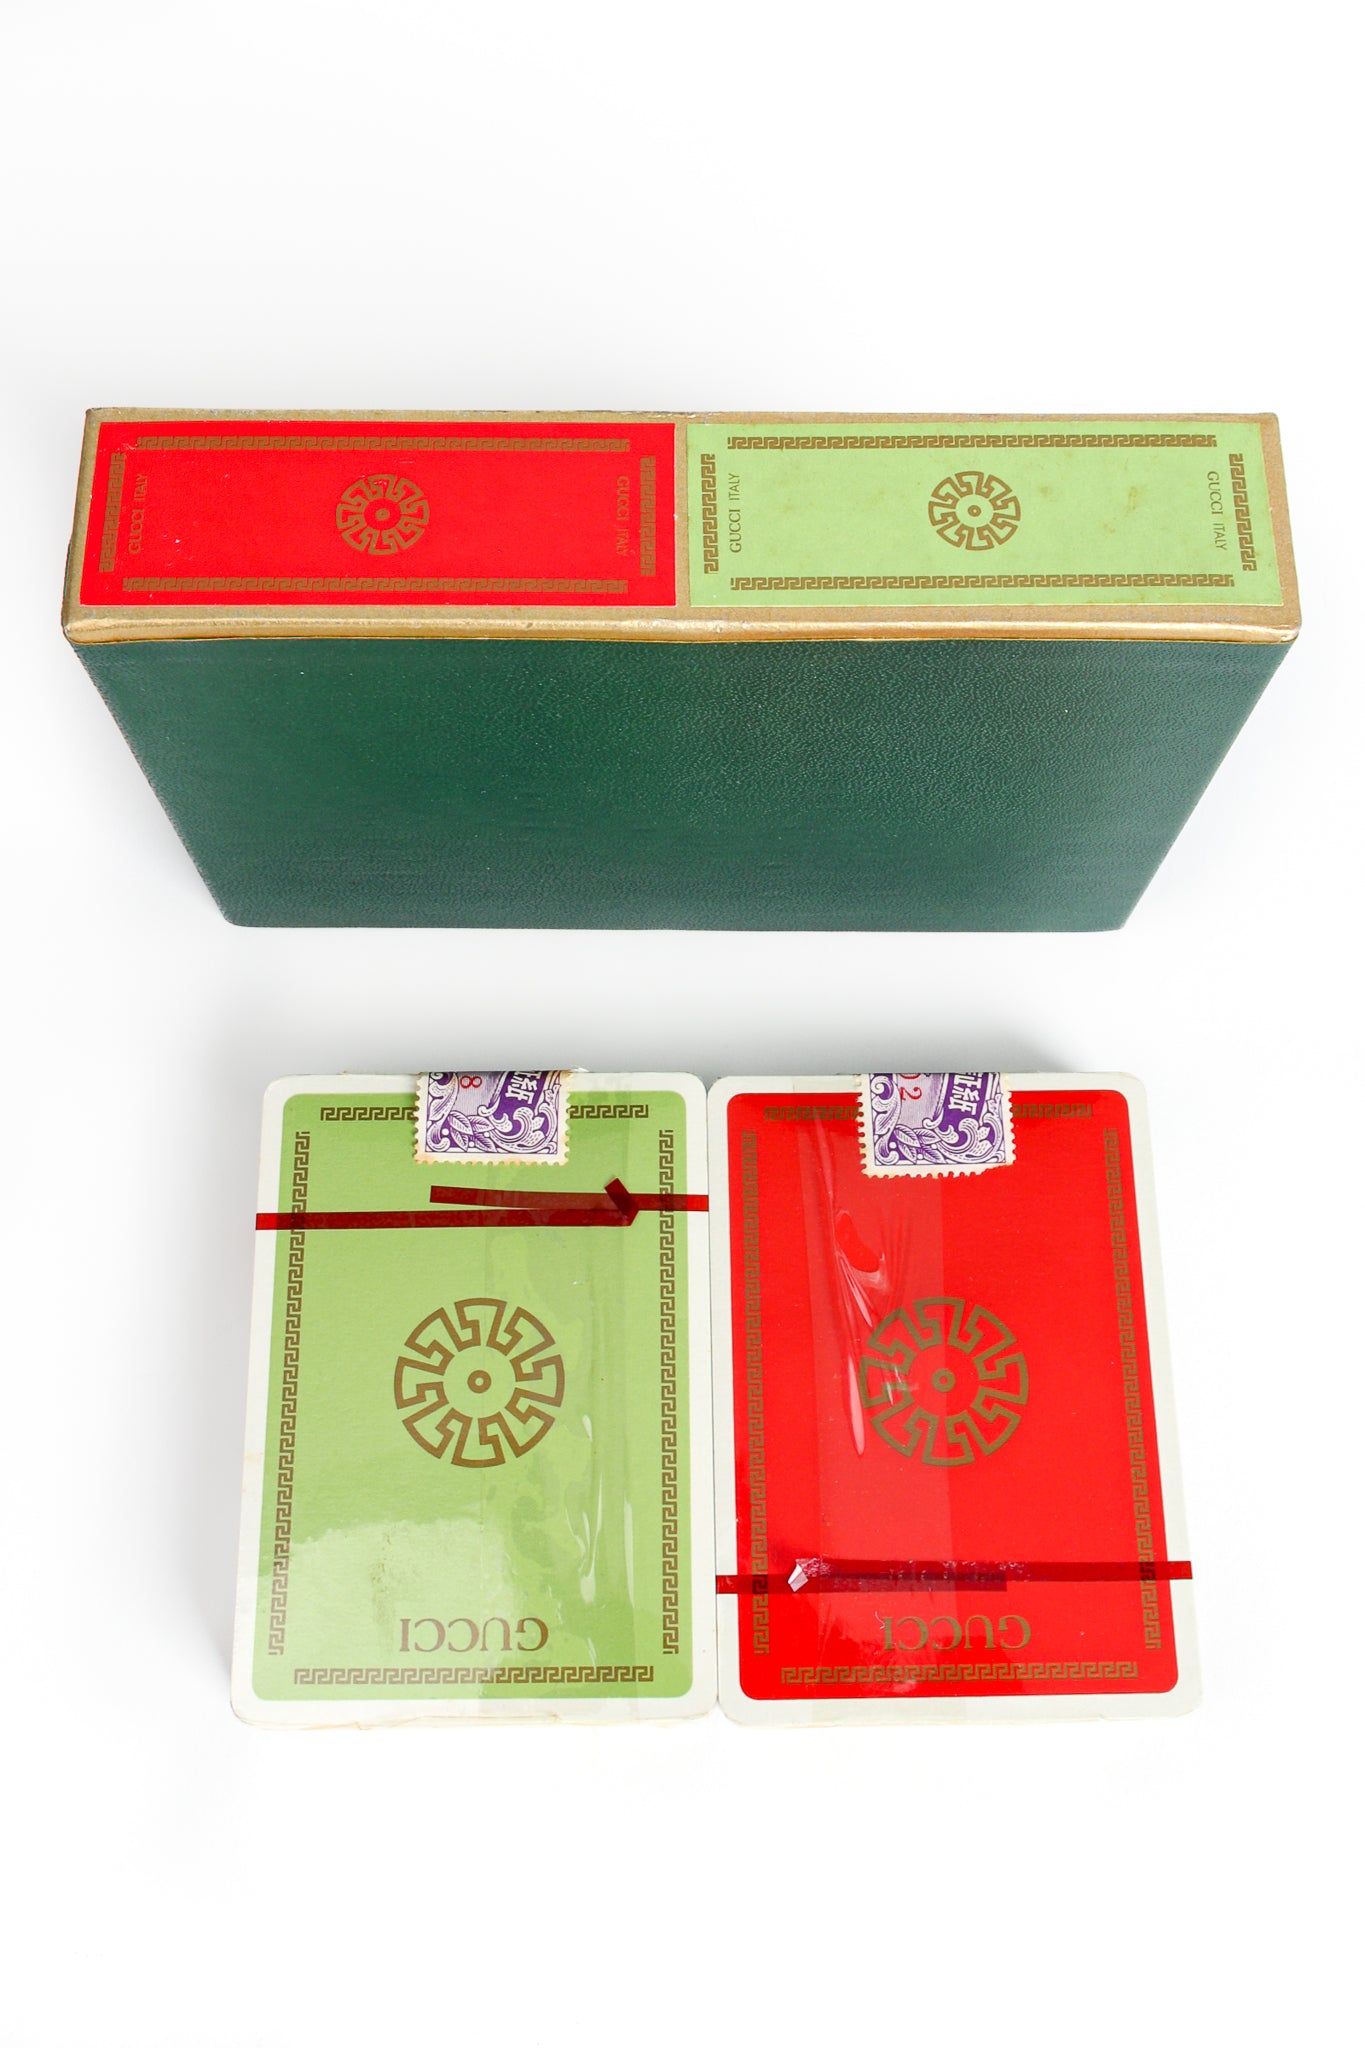 Vintage Gucci New In Box Unopened Red & Green Playing Card Set at Recess Los Angeles